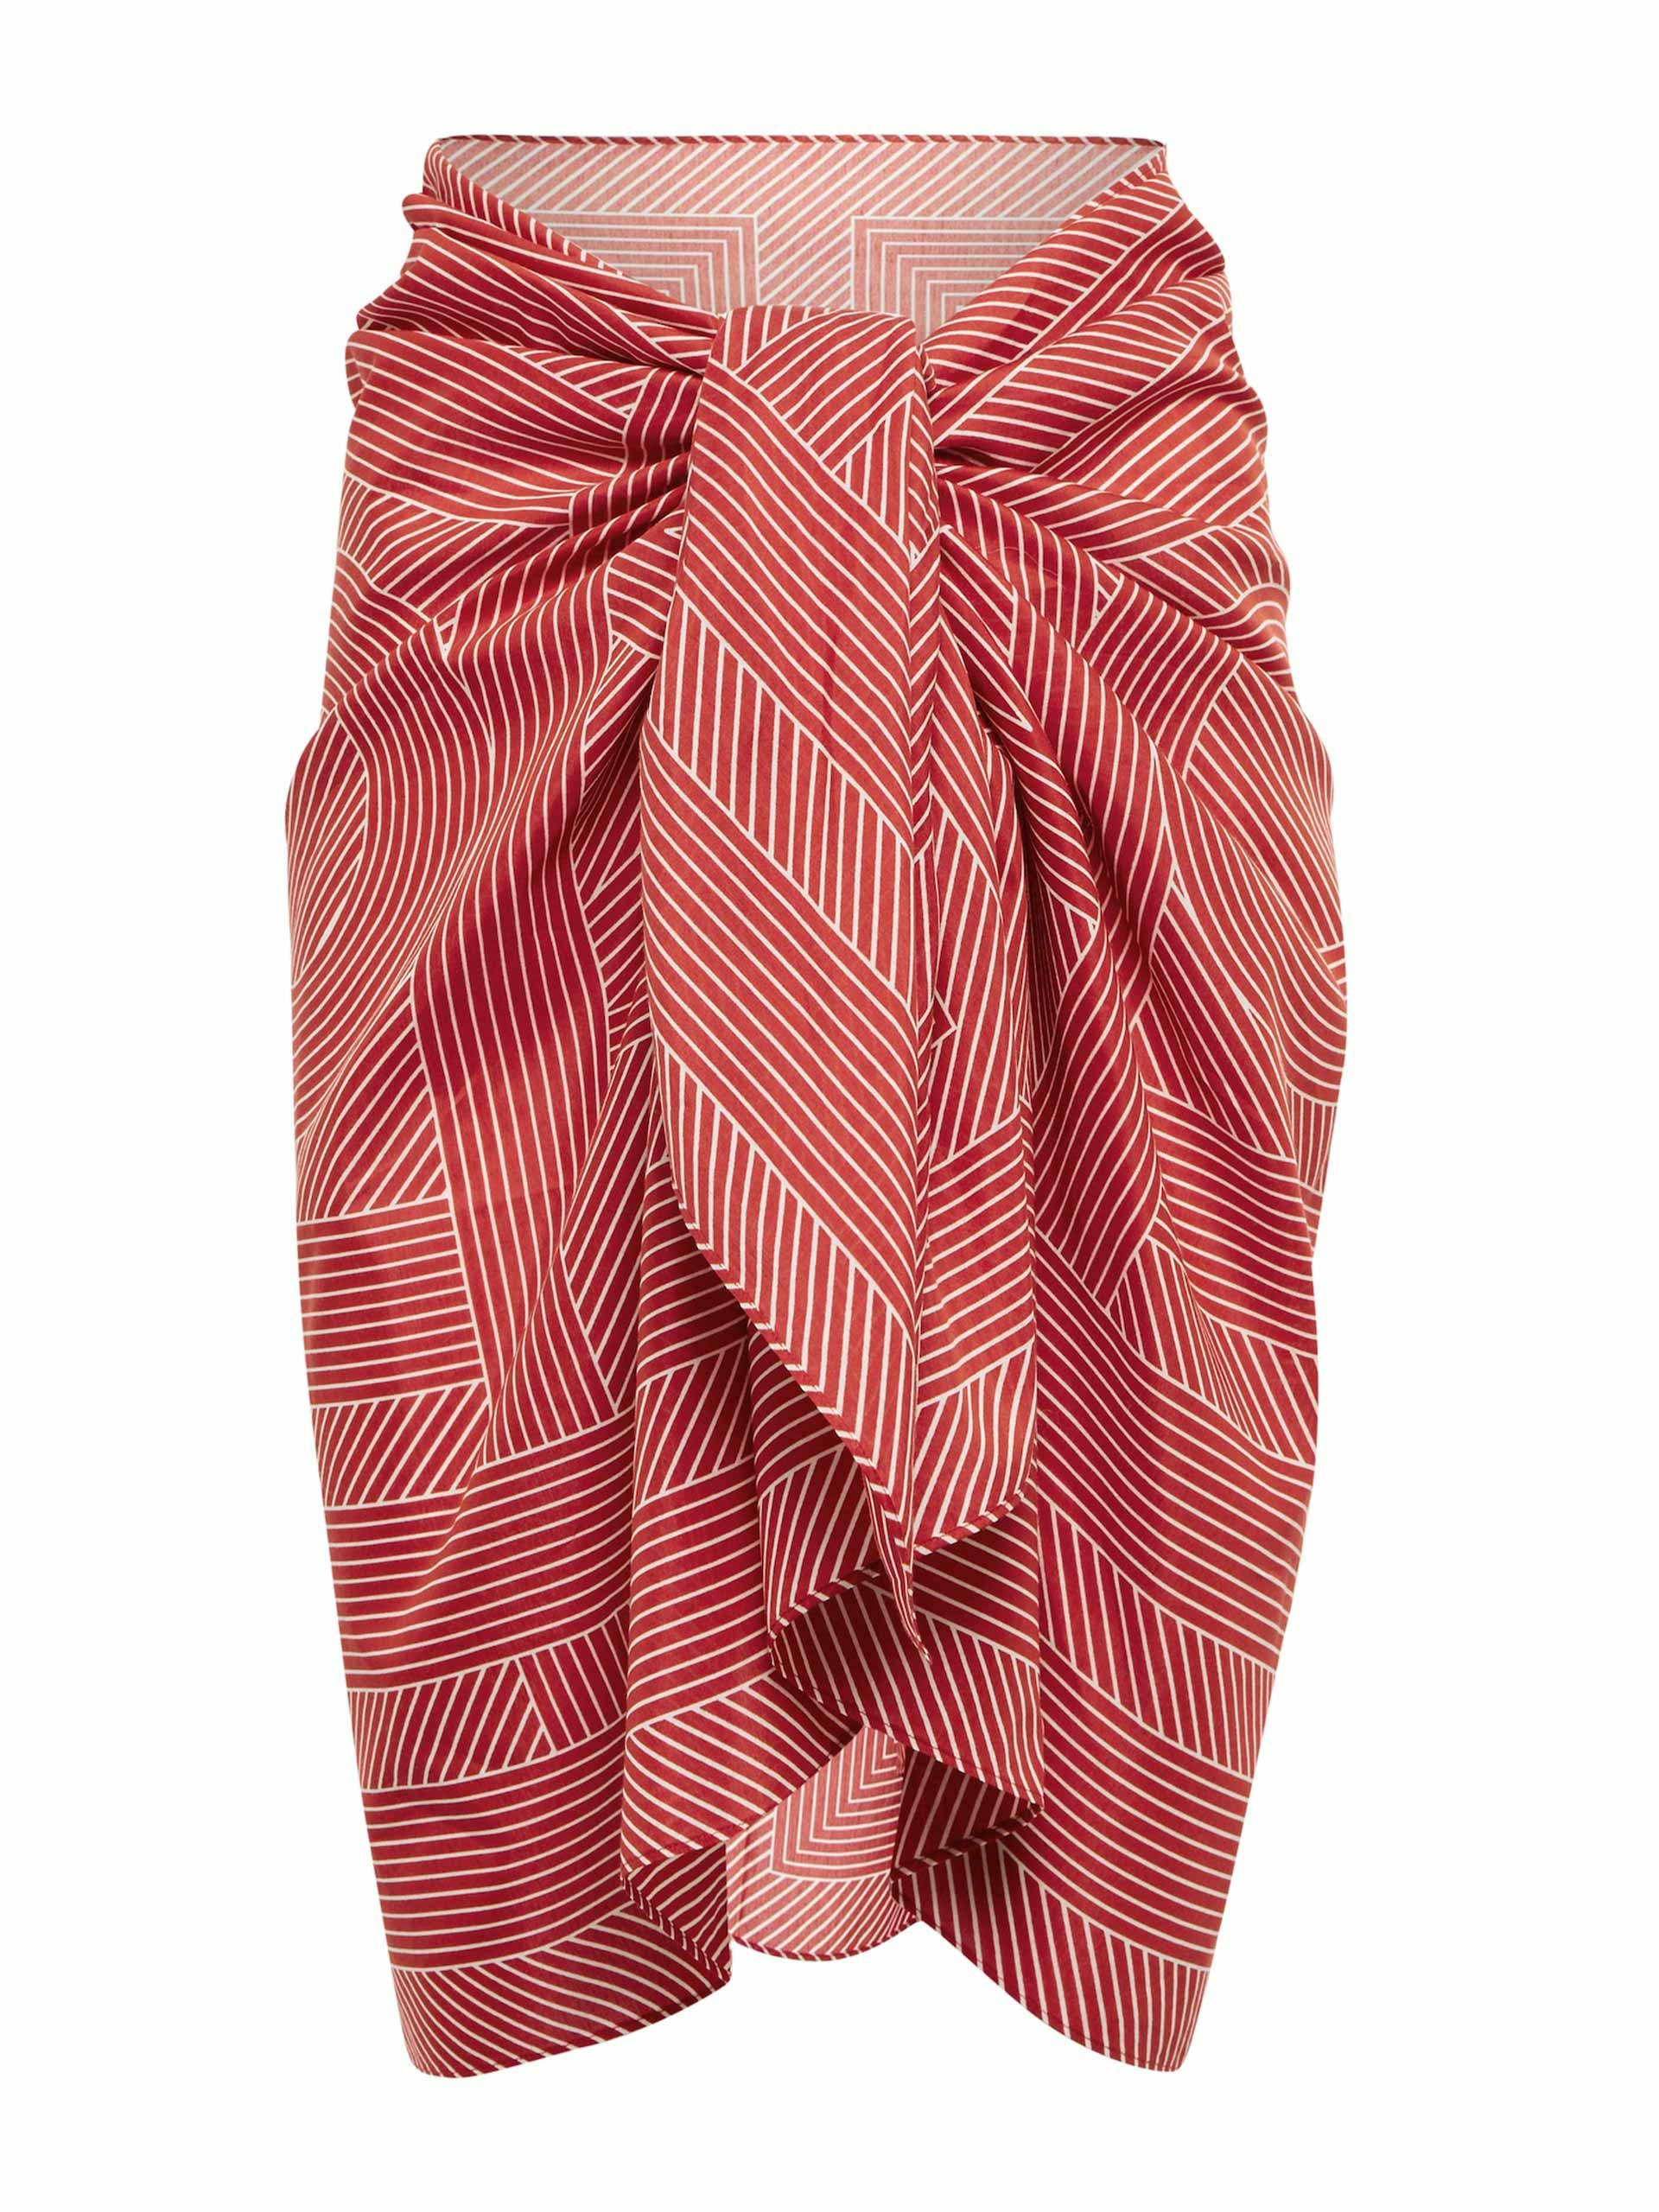 Red and white sarong